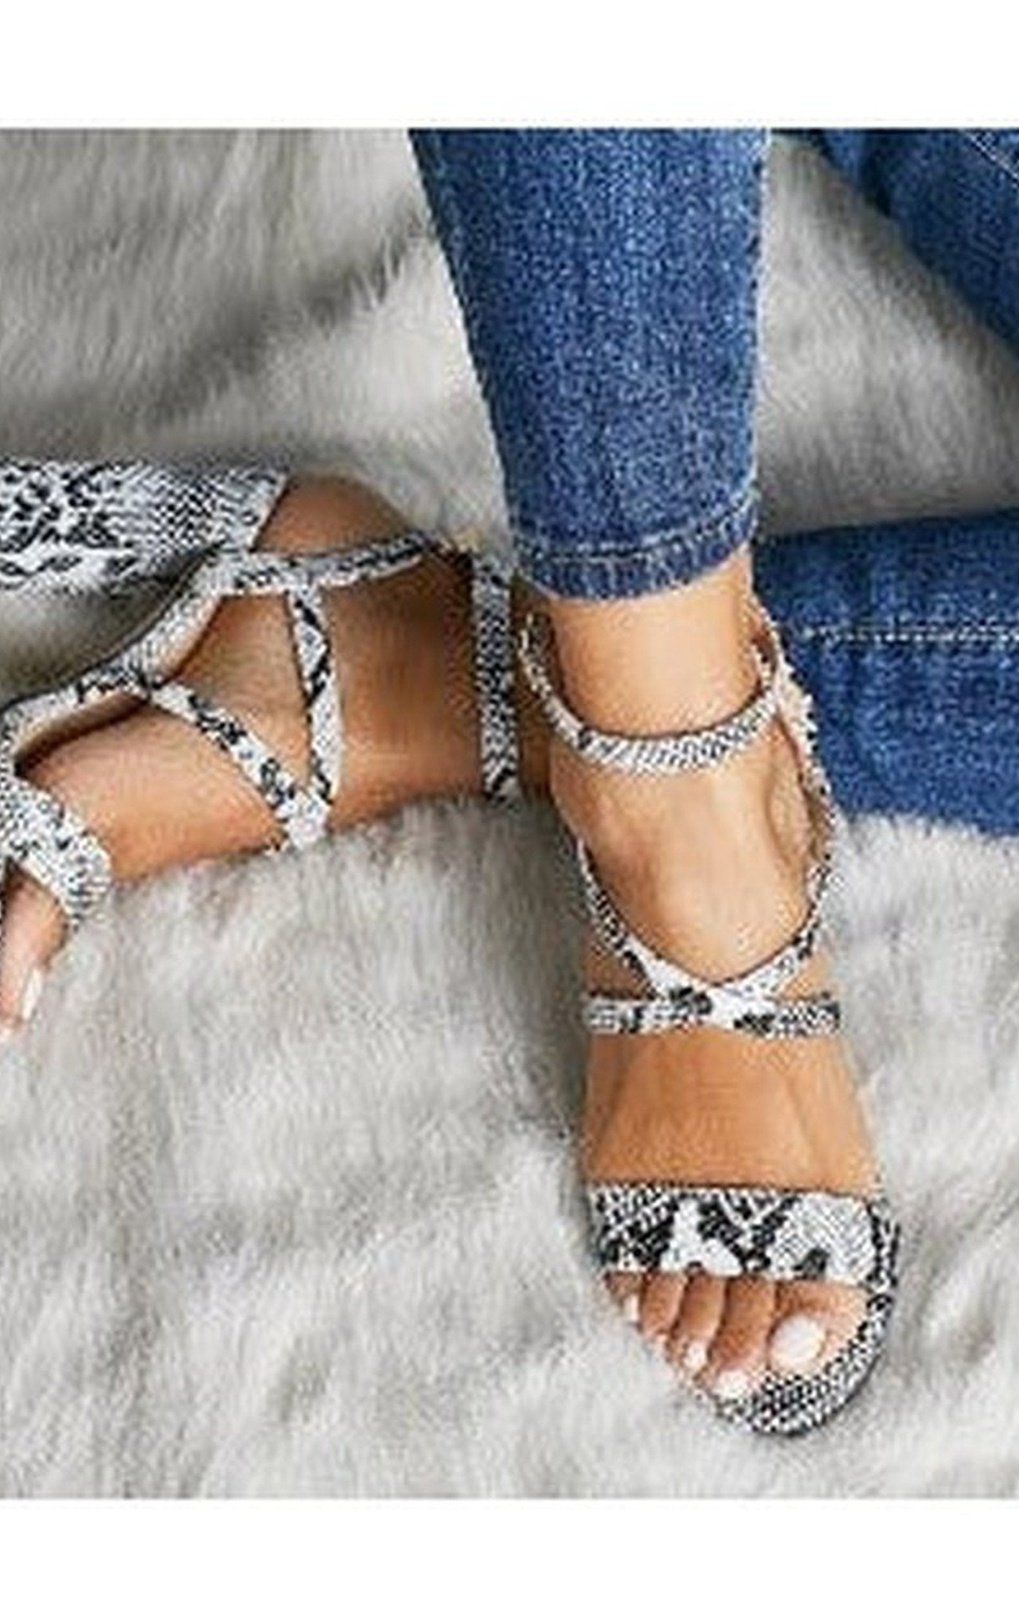 Snakeskin chunky high heel sandals Shoes